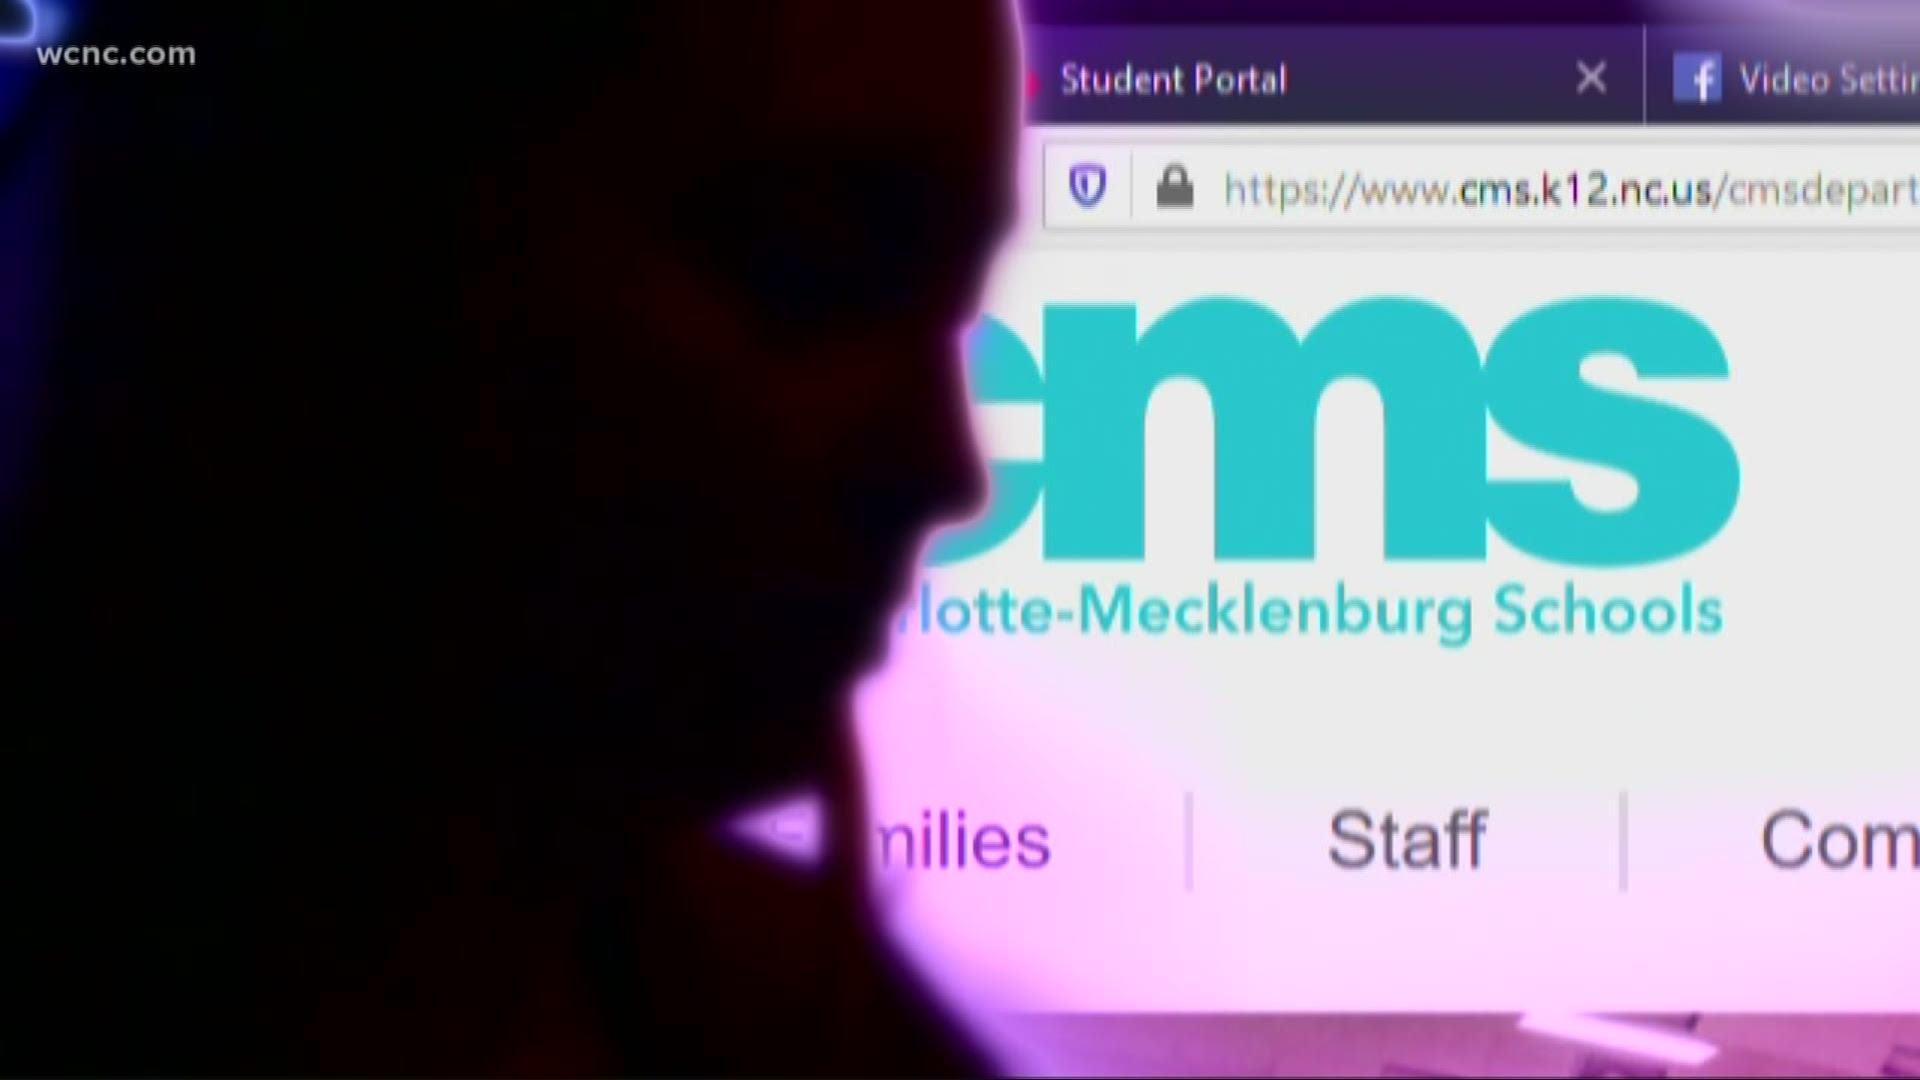 While most seniors put in hard work to graduate, educators told WCNC Charlotte that some CMS schools give some kids an easy, last-second advantage to get diplomas.